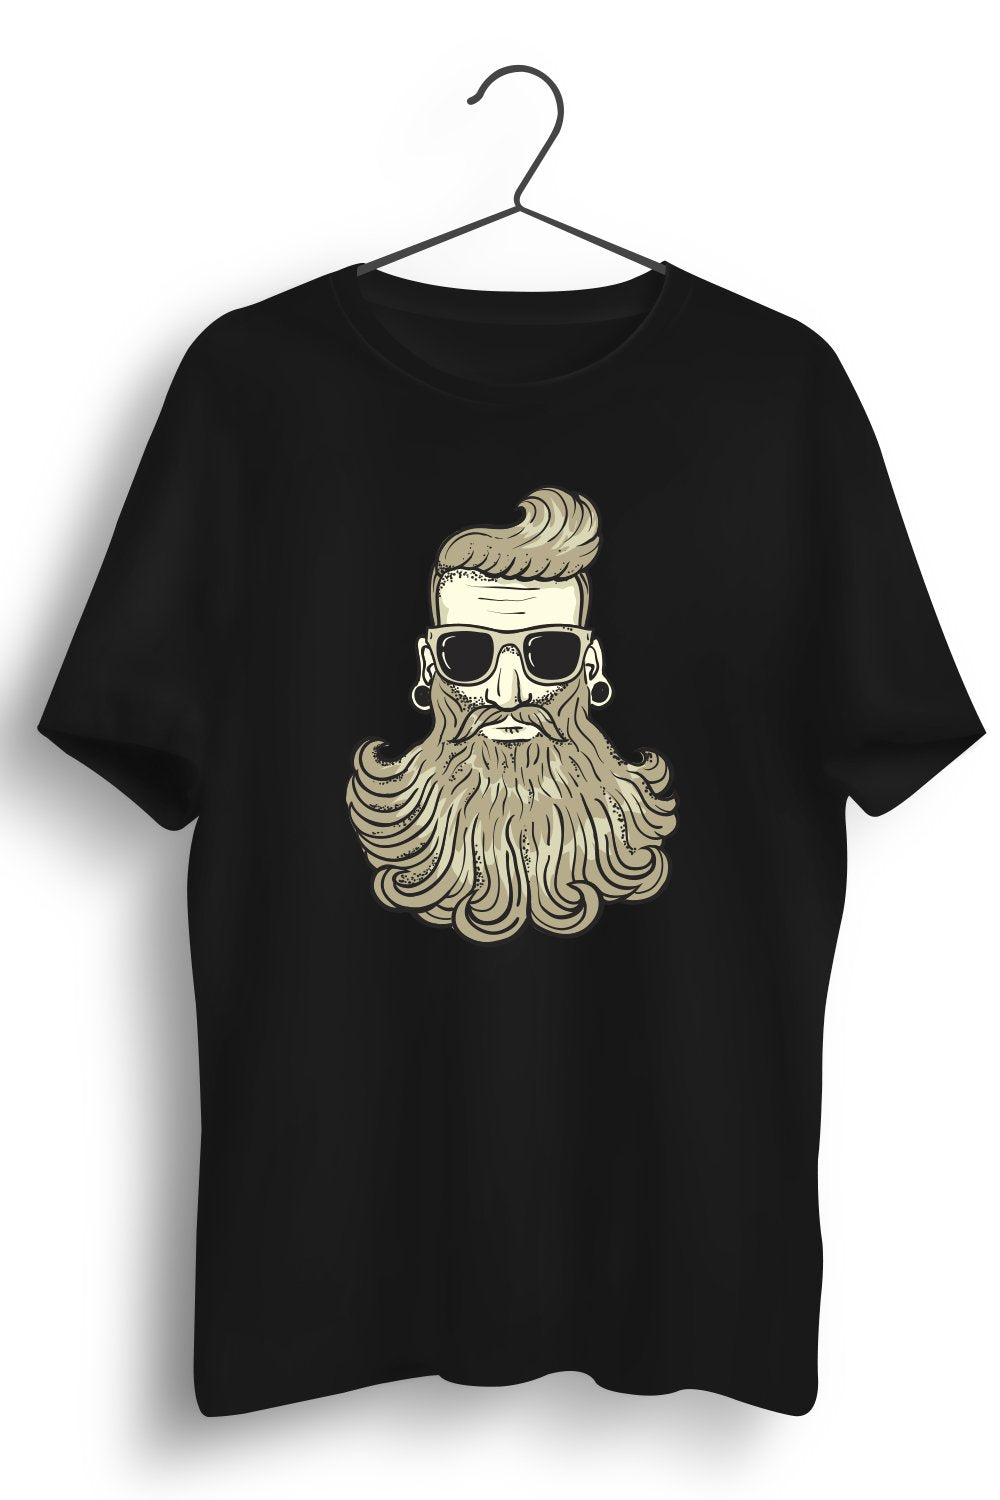 Bearded Hipster Graphic Printed Black Tshirt